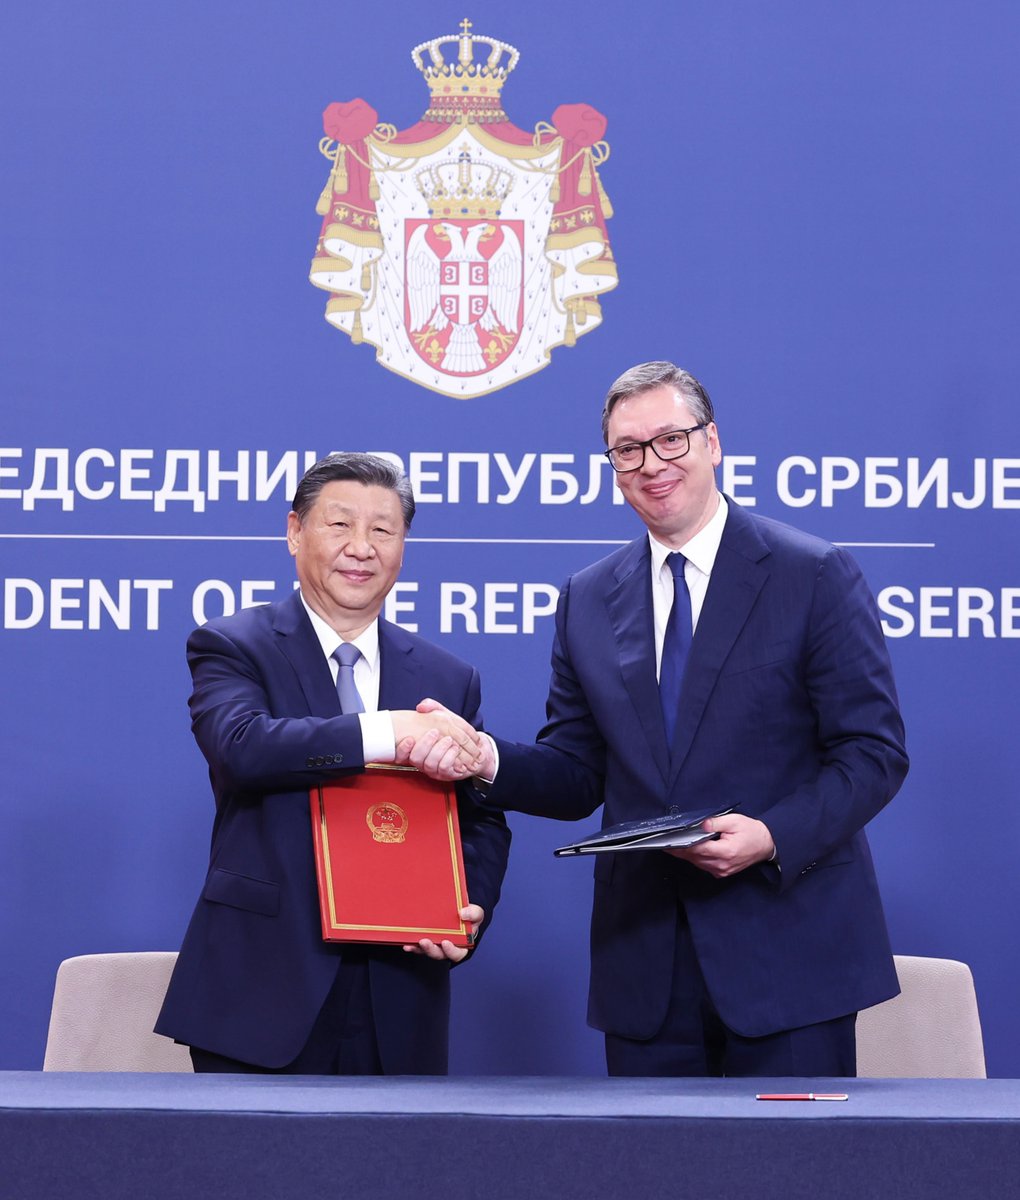 President Xi Jinping announced the first batch of six practical steps China will take to support the building of a China-Serbia community with a shared future in the new era. 1⃣ The China-Serbia Free Trade Agreement will take effect on July 1 this year. 2⃣ China supports Serbia